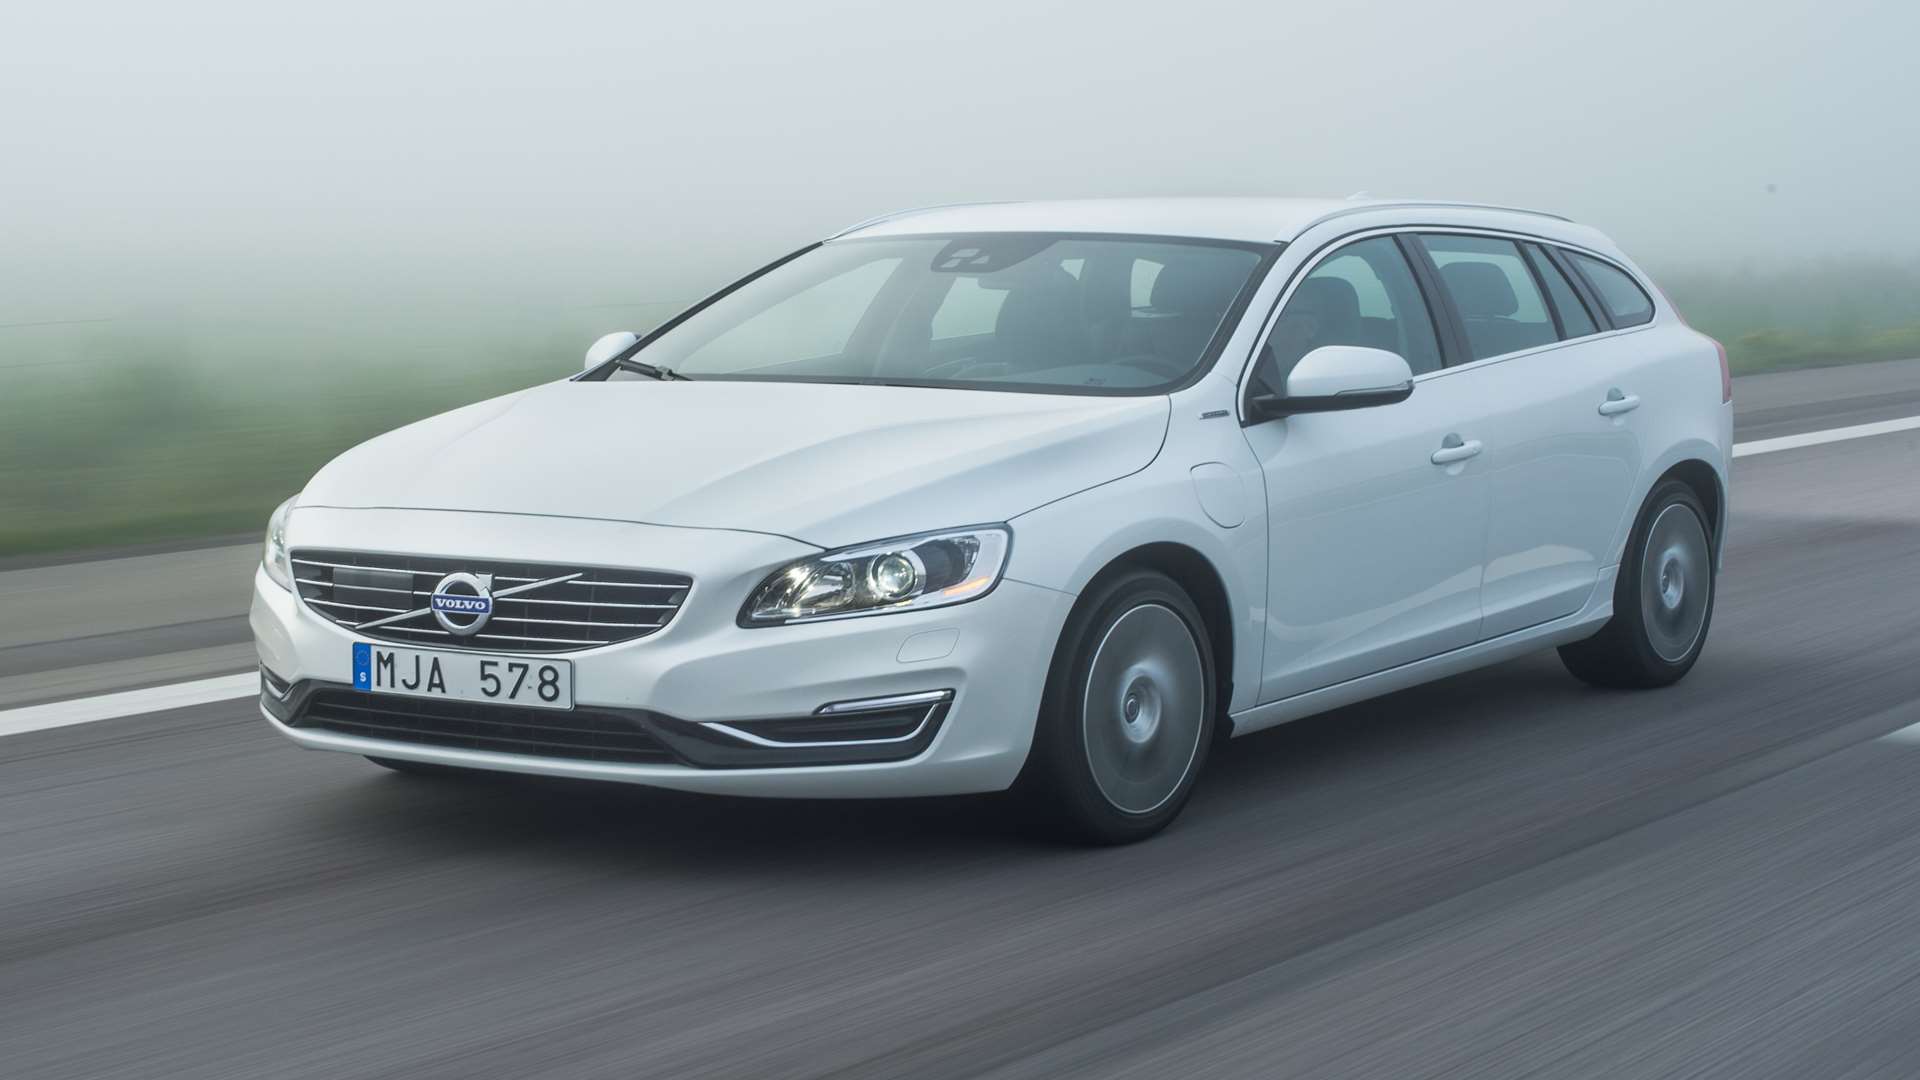 The V60 is happiest on long, straight highways